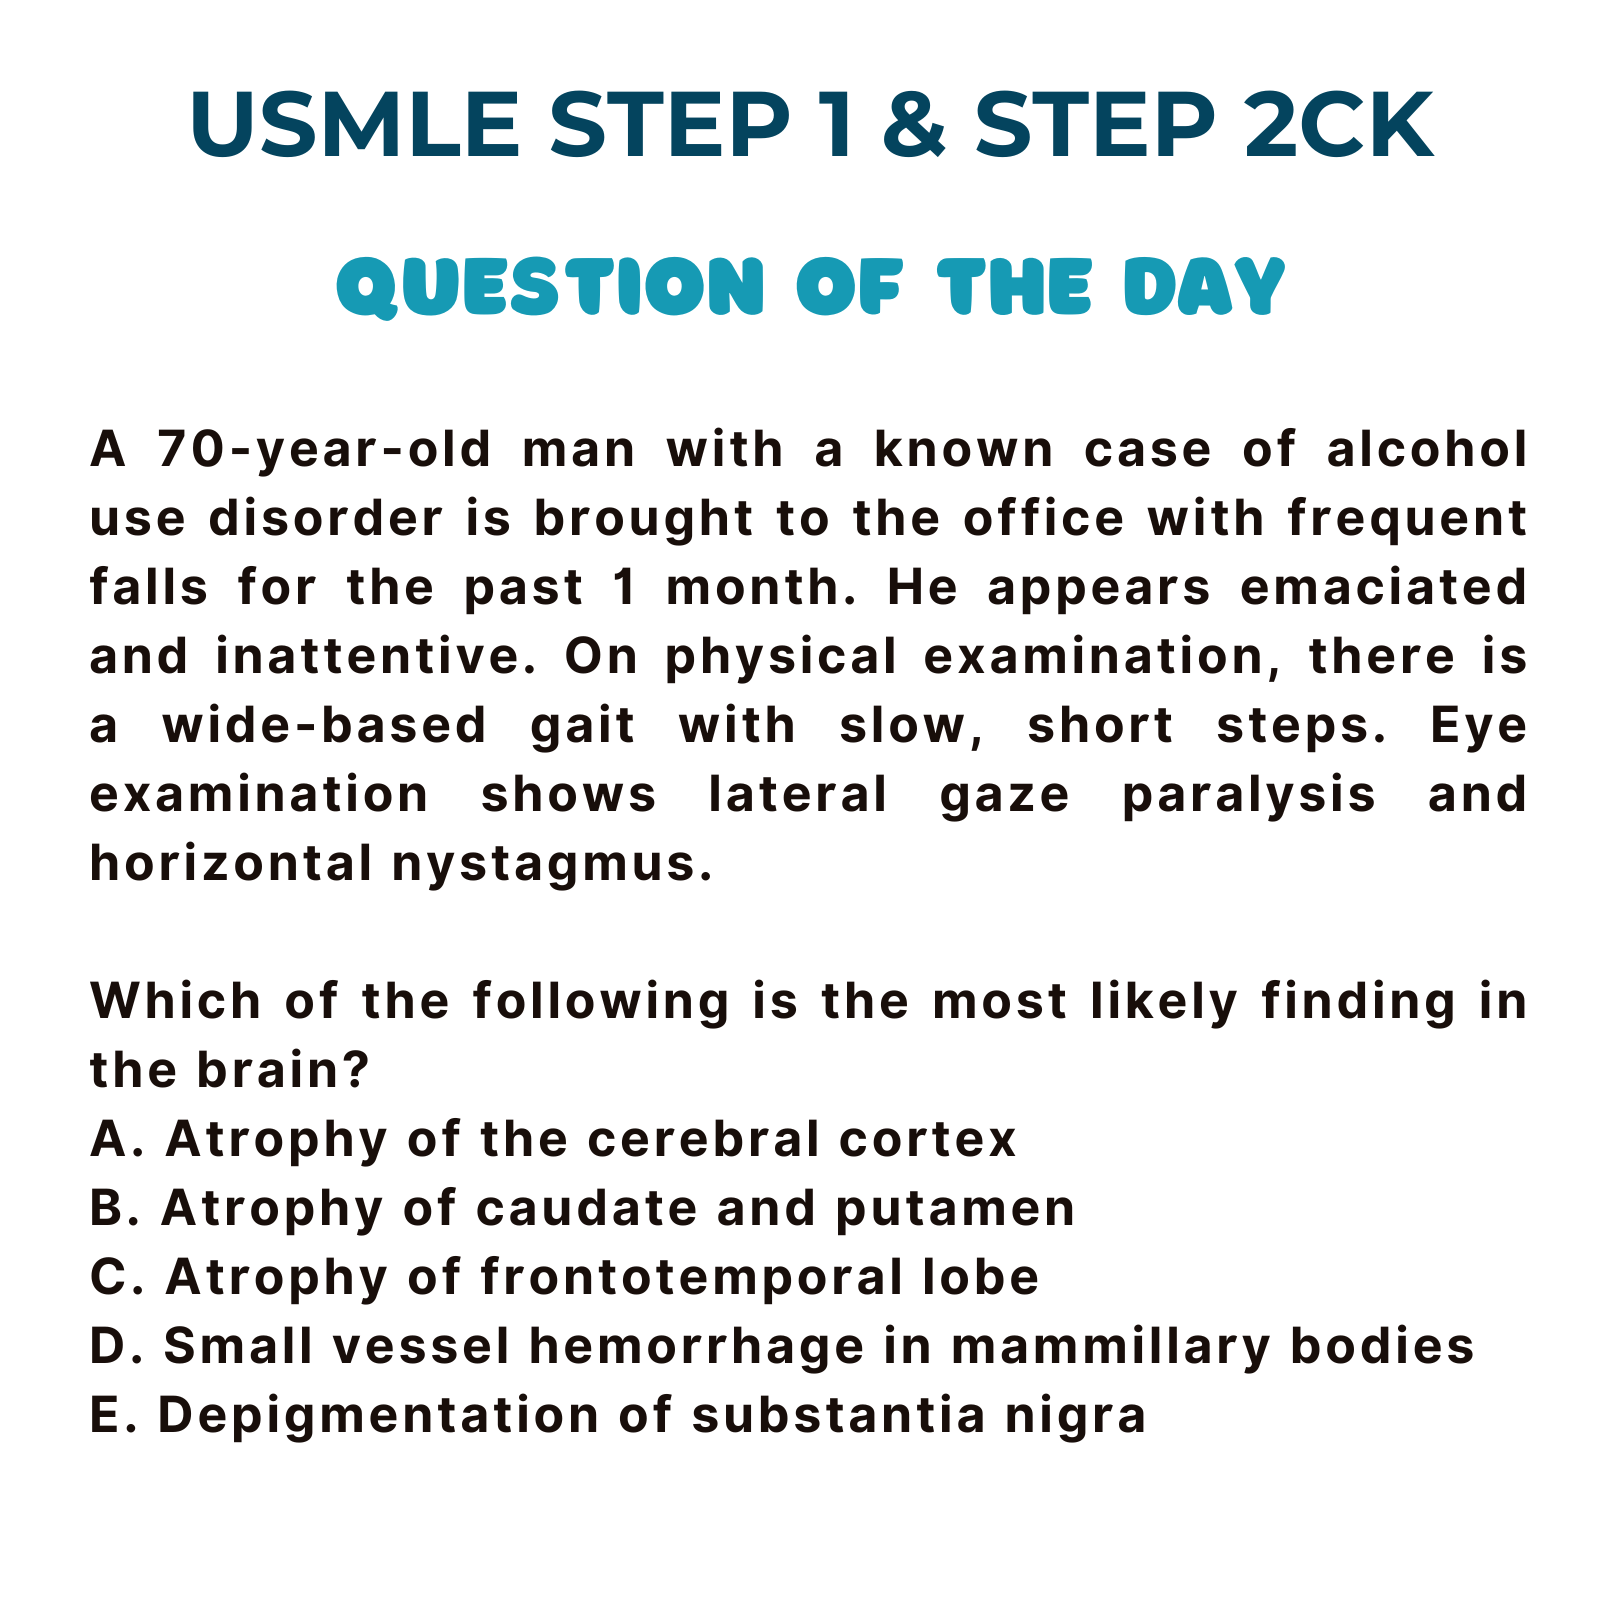 USMLE Question of the Day - Next Steps